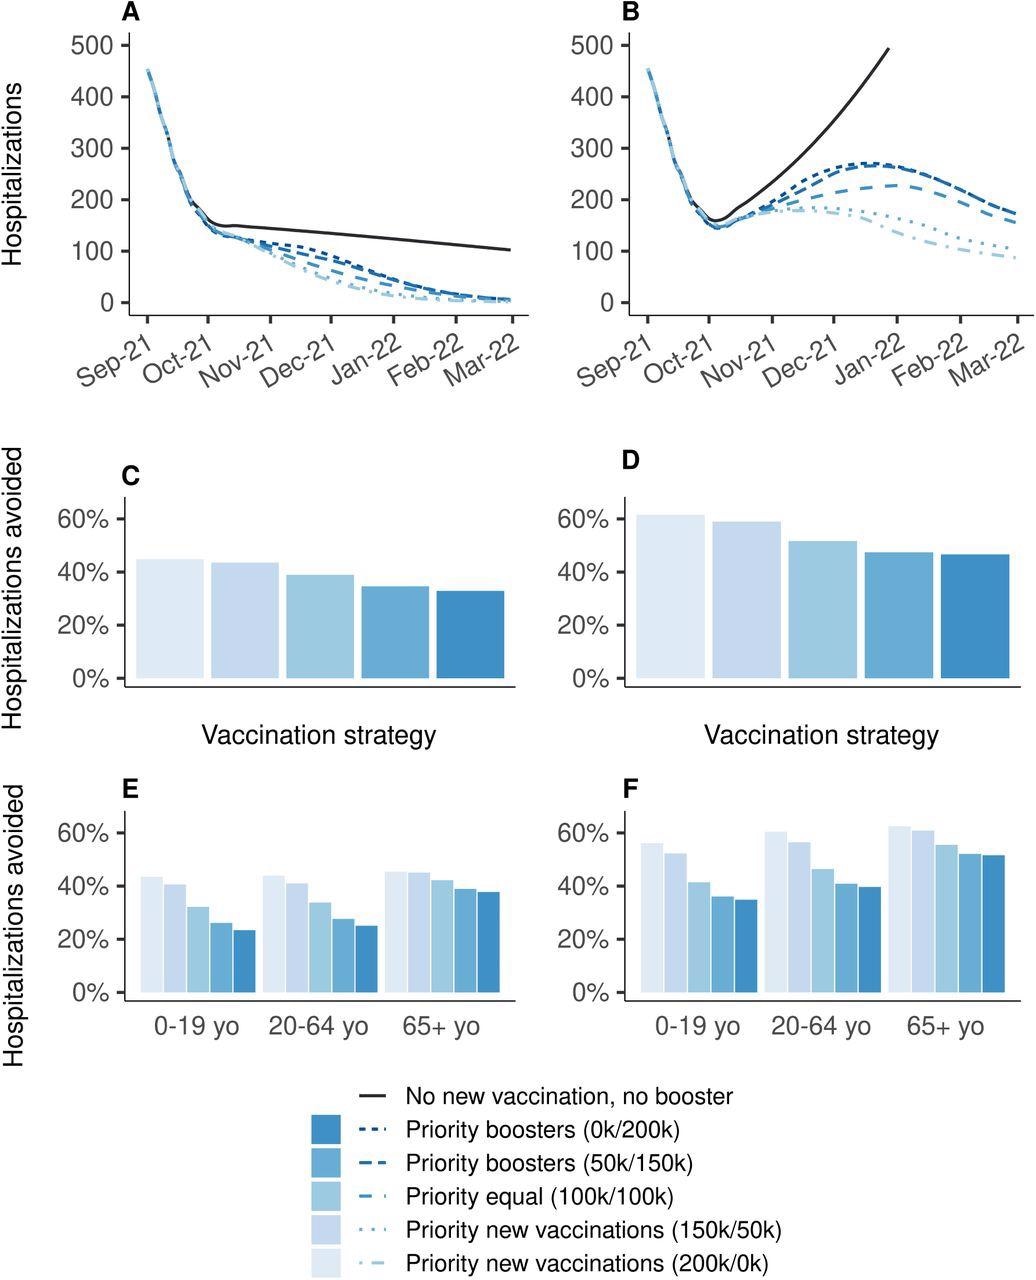 Efficiency on hospitalizations of vaccination strategies varying in the allocation of 200,000 daily doses between the primary vaccination and booster shots, over the period from September 1, 2021 to March 1, 2022, compared to a reference scenario in which any vaccination is discontinued on September 1, 2021. (A, C, E) The vaccine's effectiveness only decreased for people 65 years of age and older.  (B, D, F) Vaccine efficacy decreased for all age groups.  (A, B) New daily hospitalizations, (C, D) proportion of hospitalizations avoided, (E, F) proportion of hospitalizations avoided by age group.  A prioritization strategy of (150,000/50,000) means 150,000 daily doses for primary immunization and 50,000 daily booster doses until 90% coverage of a target population is achieved, then every 200,000 doses daily are allocated to the other target population.